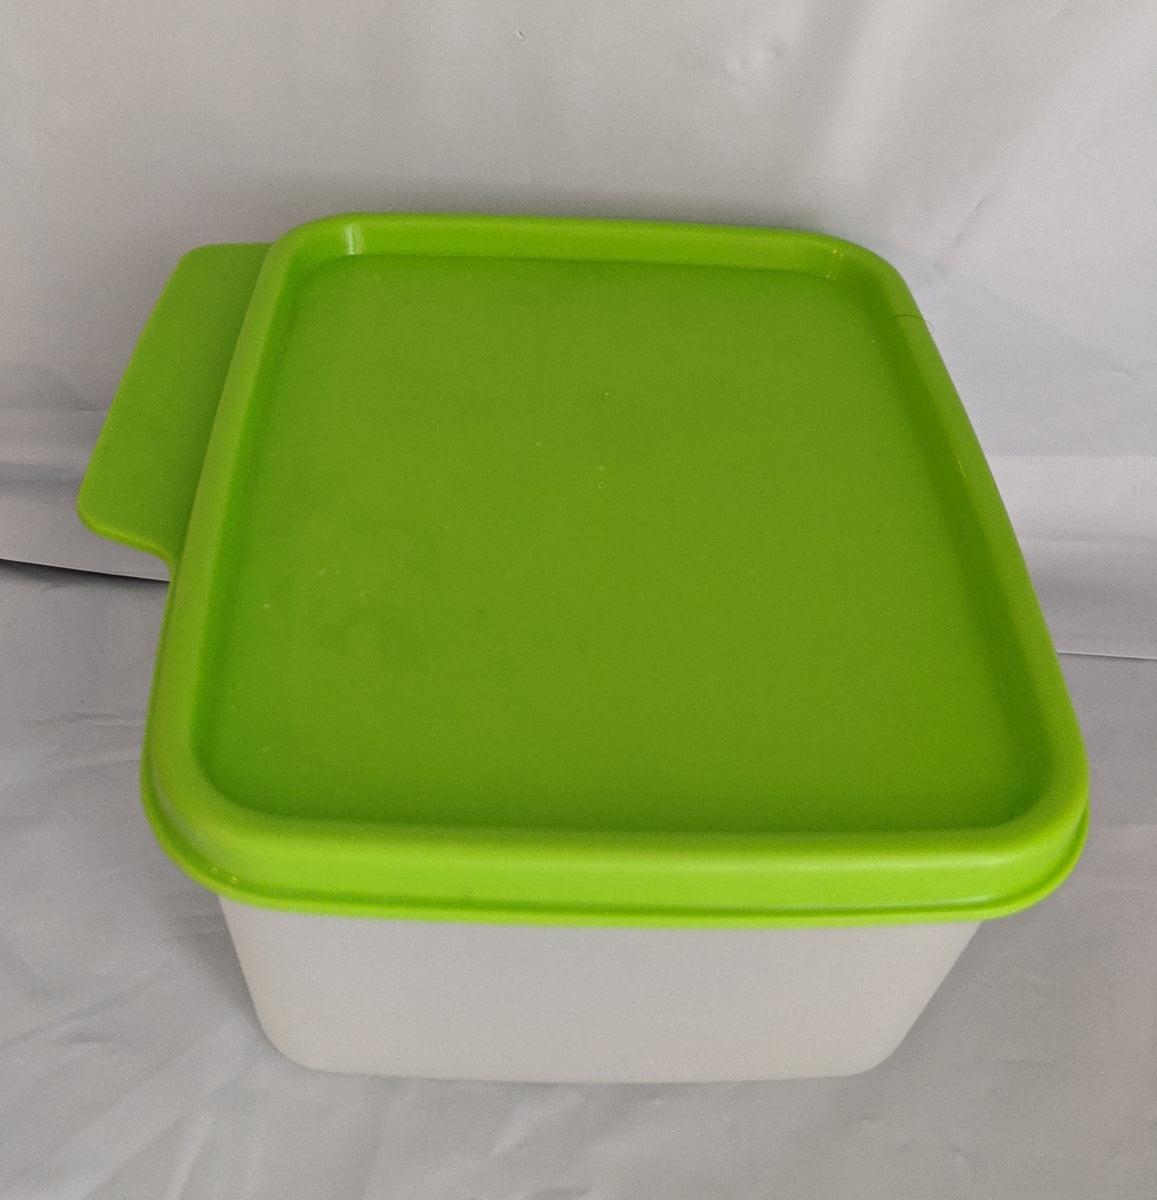 TUPPERWARE KEEPTABS 1 LARGE SQUARE STORAGE CONTAINER SEA GREEN